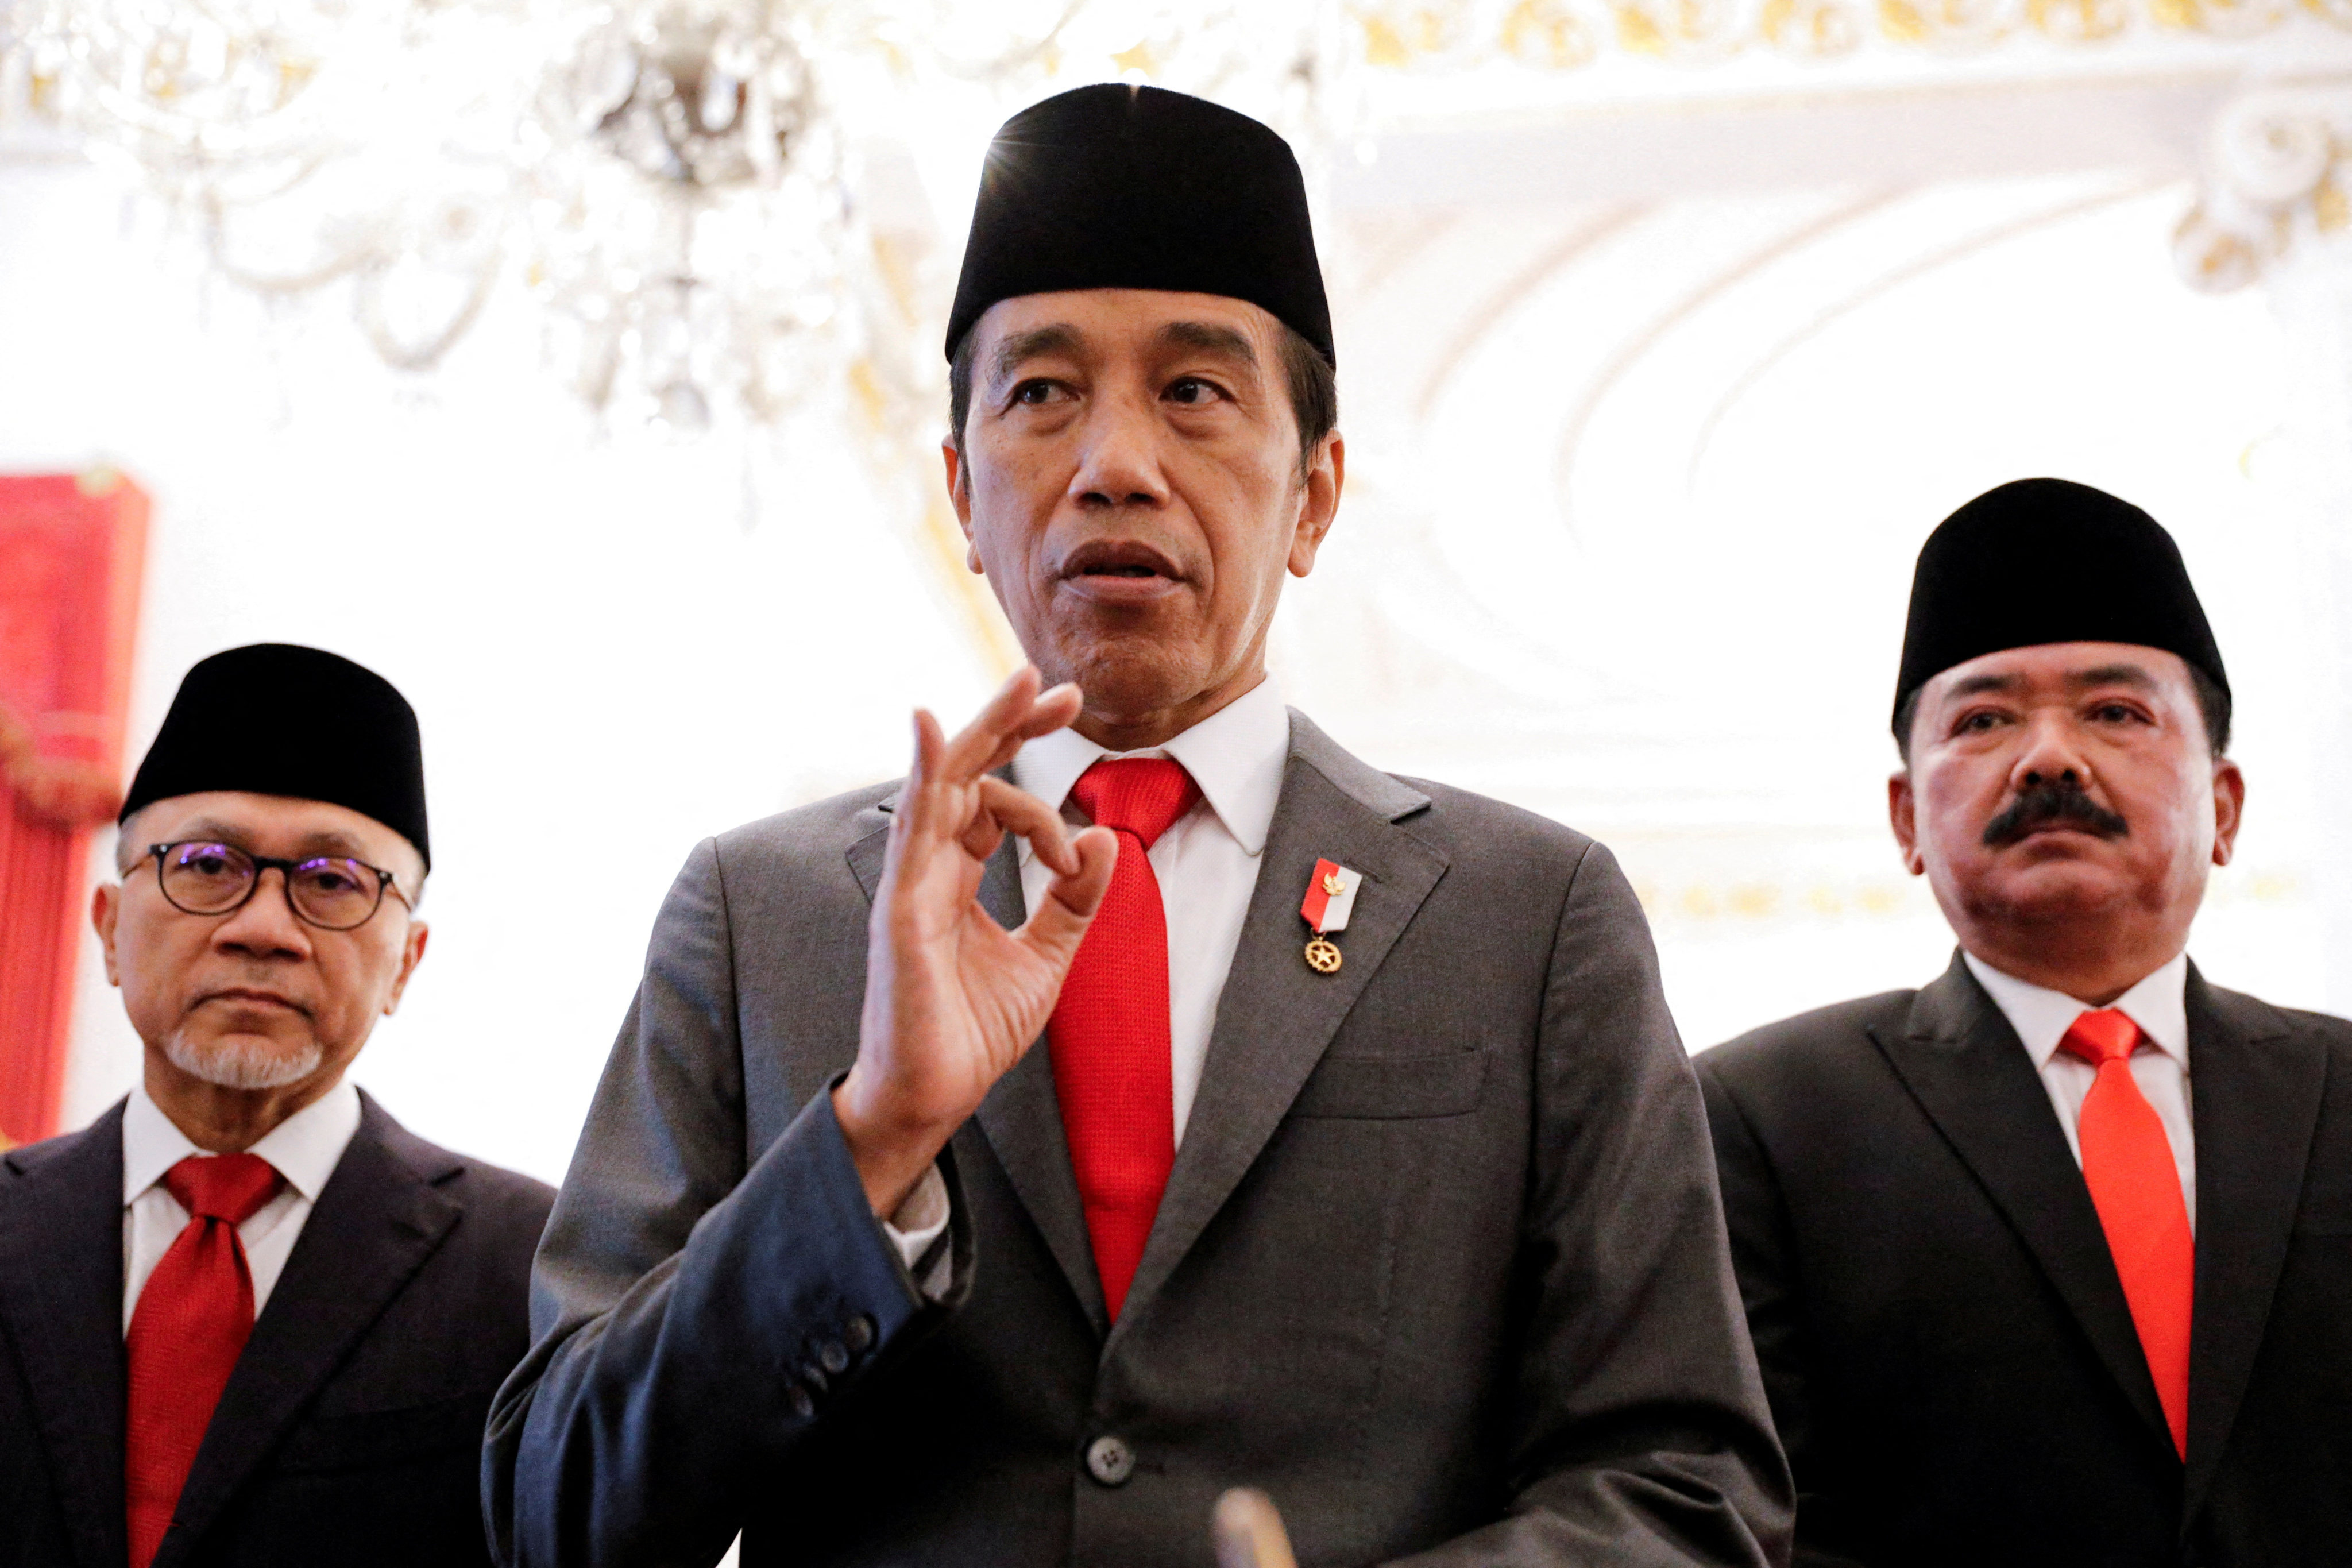 Indonesian President Joko Widodo speaks to the media, as newly inaugurated Trade Minister Zulkifli Hasan and Minister of Agrarian Affairs and Spatial Planning Hadi Tjahjanto, who was former Indonesia’s military chief, stand besides him on June 15. File photo: Reuters